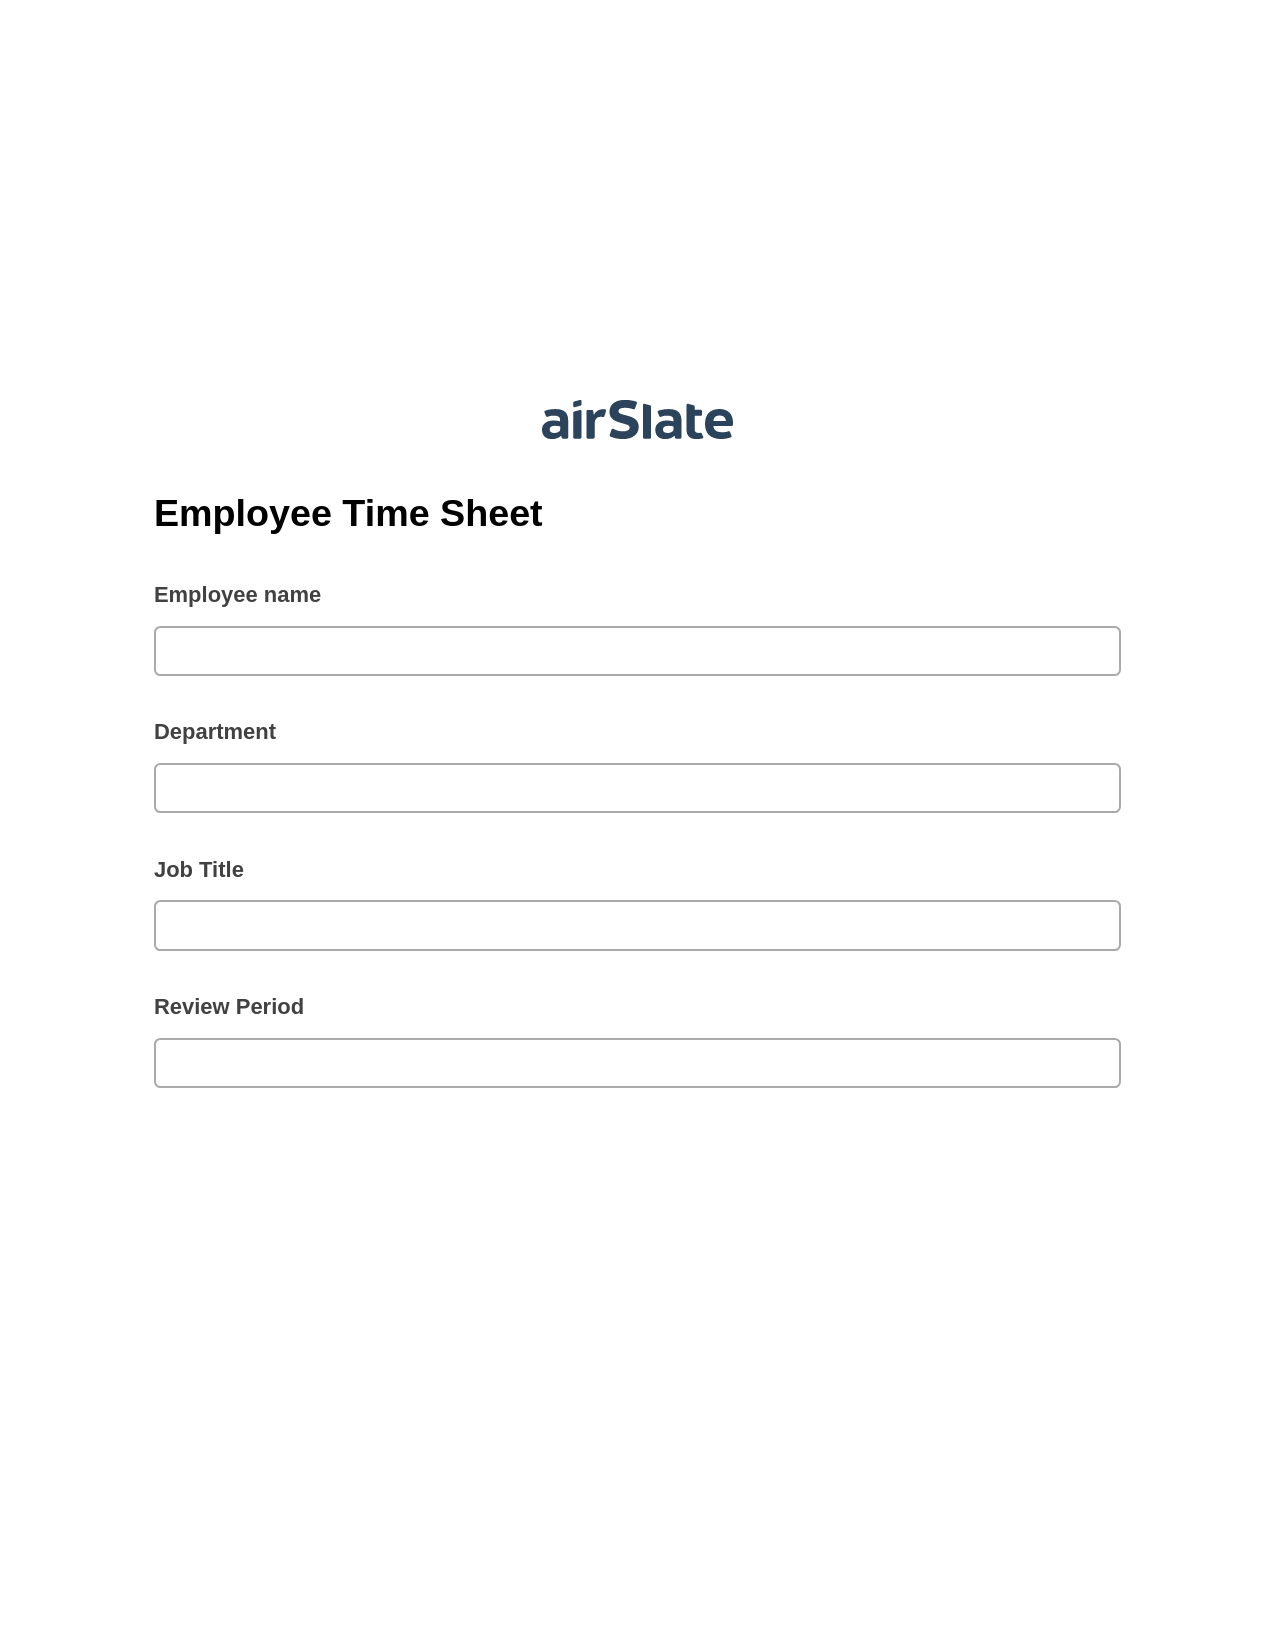 Multirole Employee Time Sheet Pre-fill from Salesforce Records with SOQL Bot, Create Salesforce Records Bot, Export to NetSuite Bot